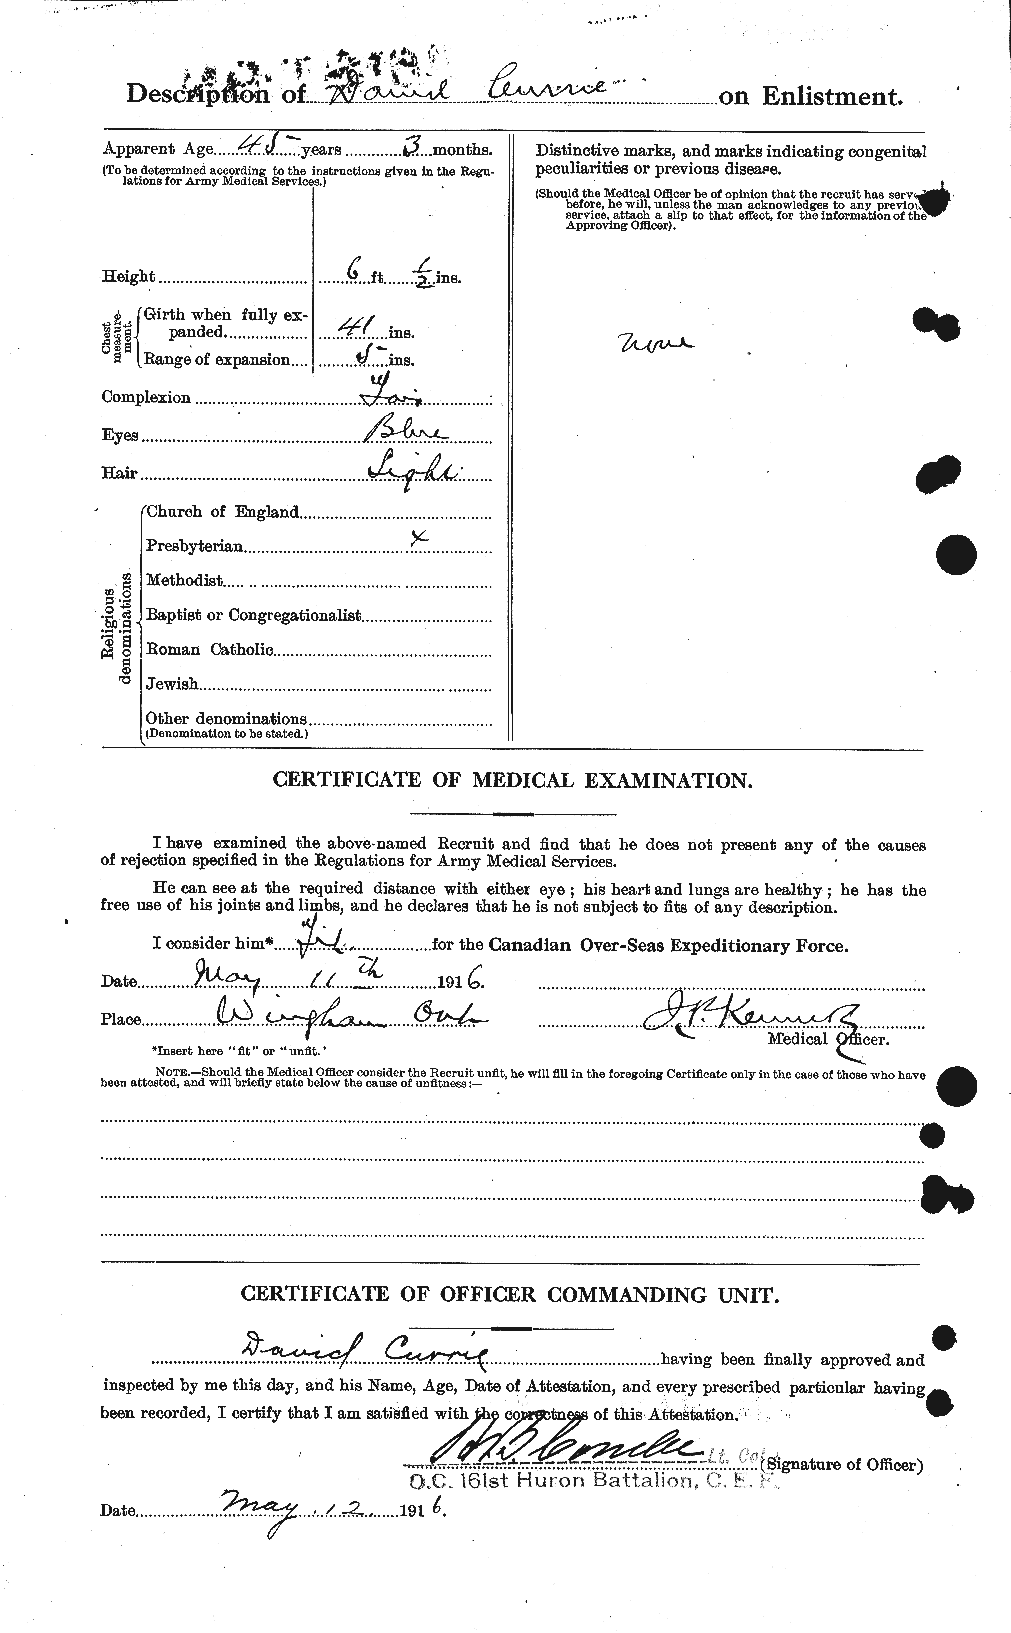 Personnel Records of the First World War - CEF 073038b